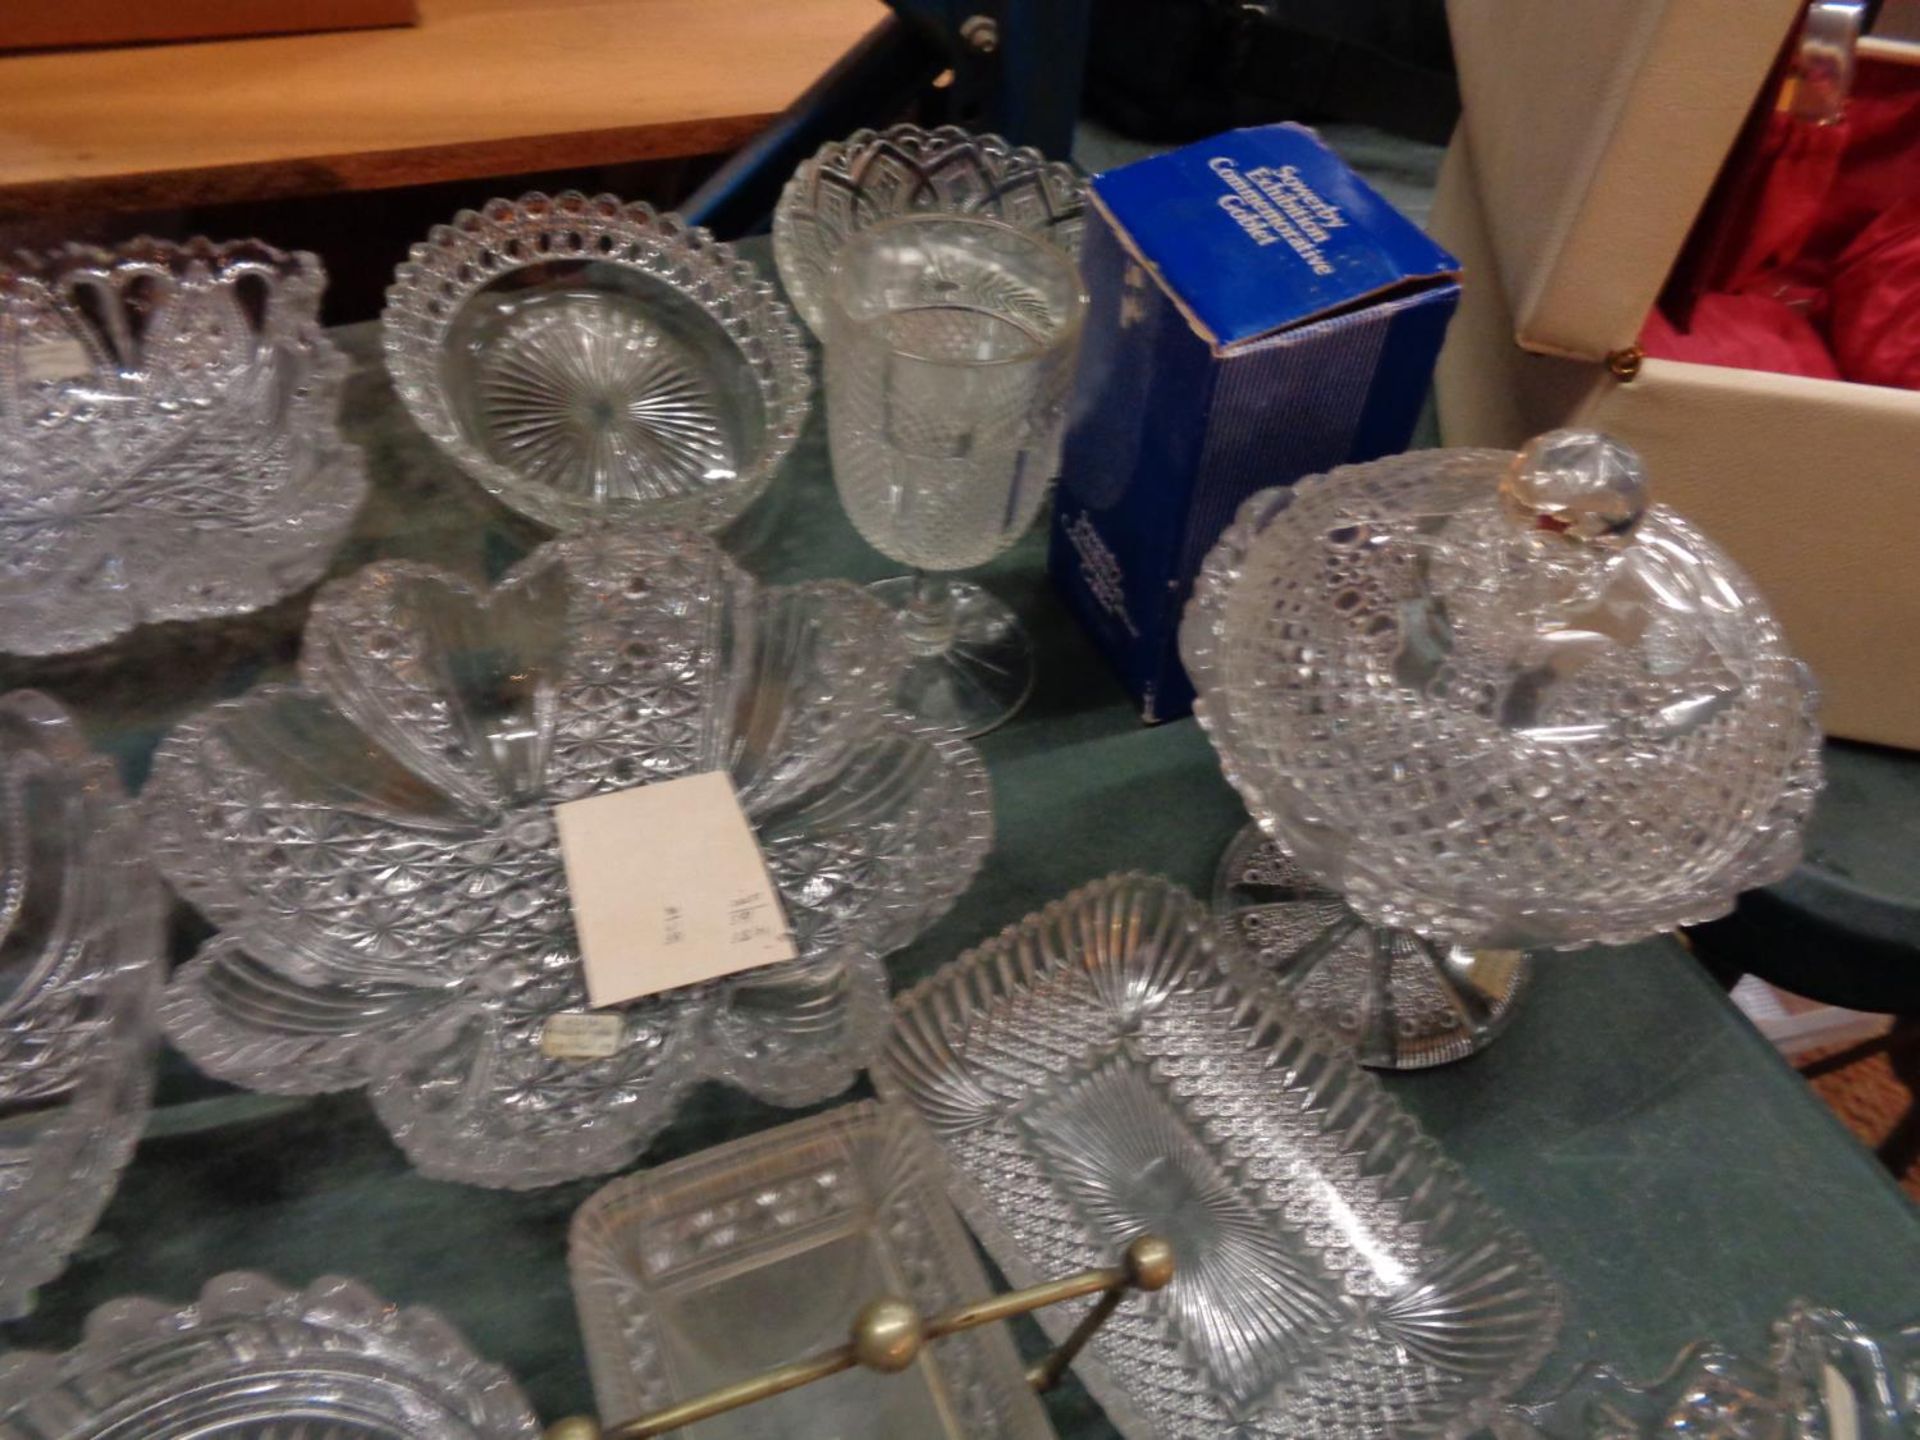 A LARGE SELECTION OF CLEAR GLASSWARE BOWLS, TRINKET DISHES AND A CAKE STAND - Image 2 of 4